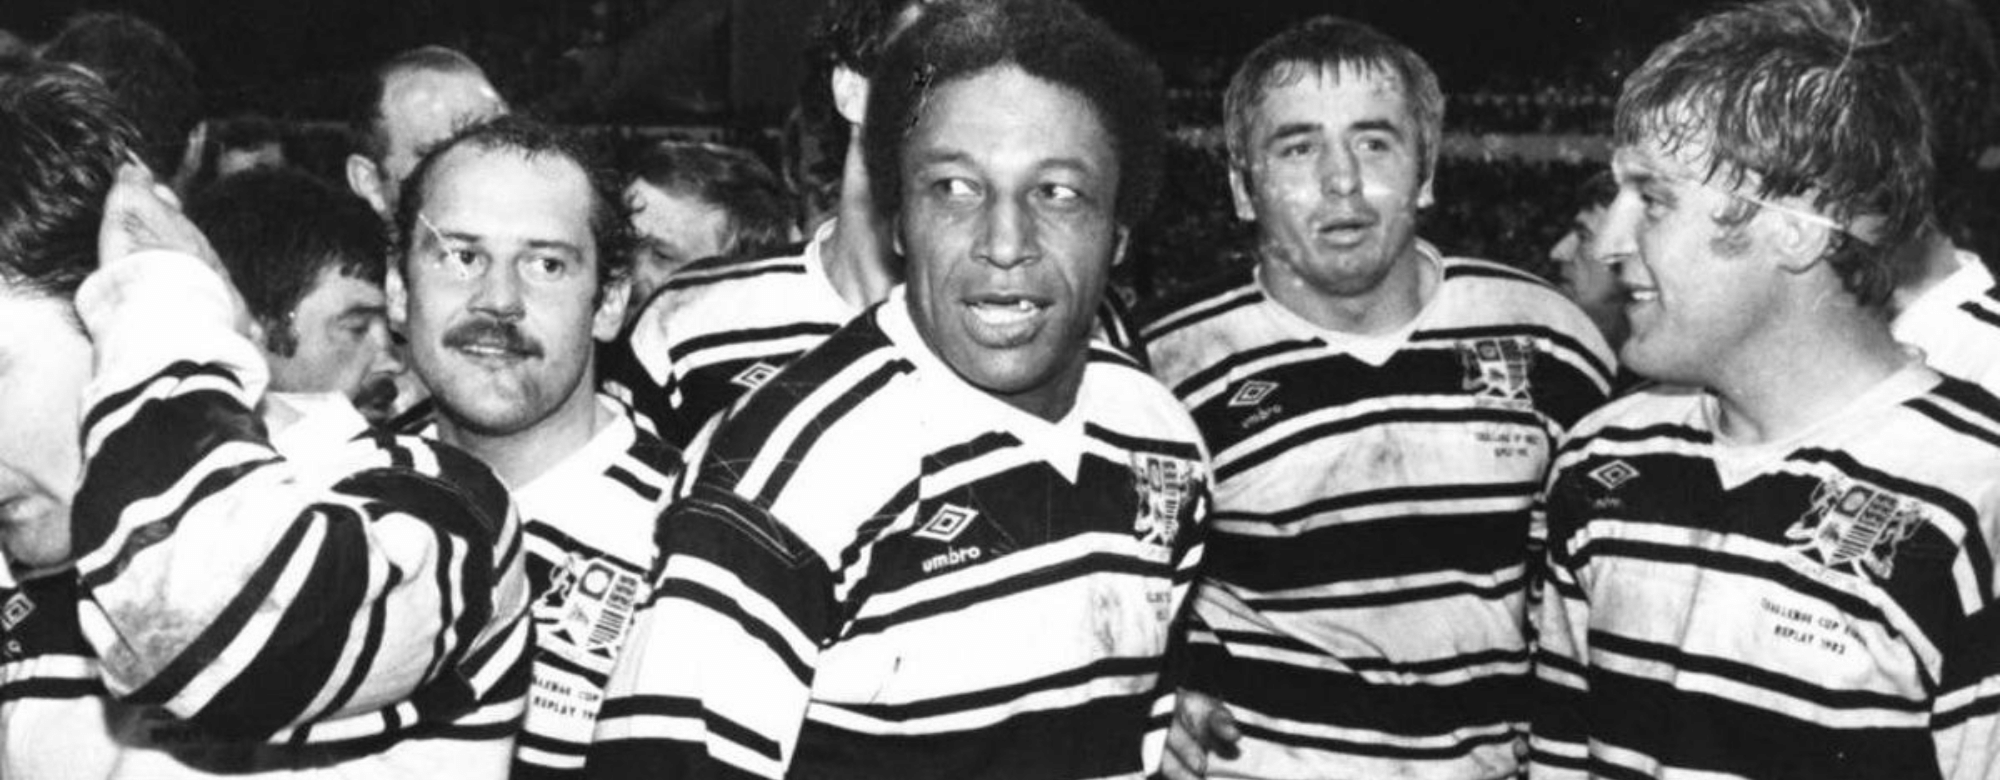 Remembering The 1982 Challenge Cup Final Replay